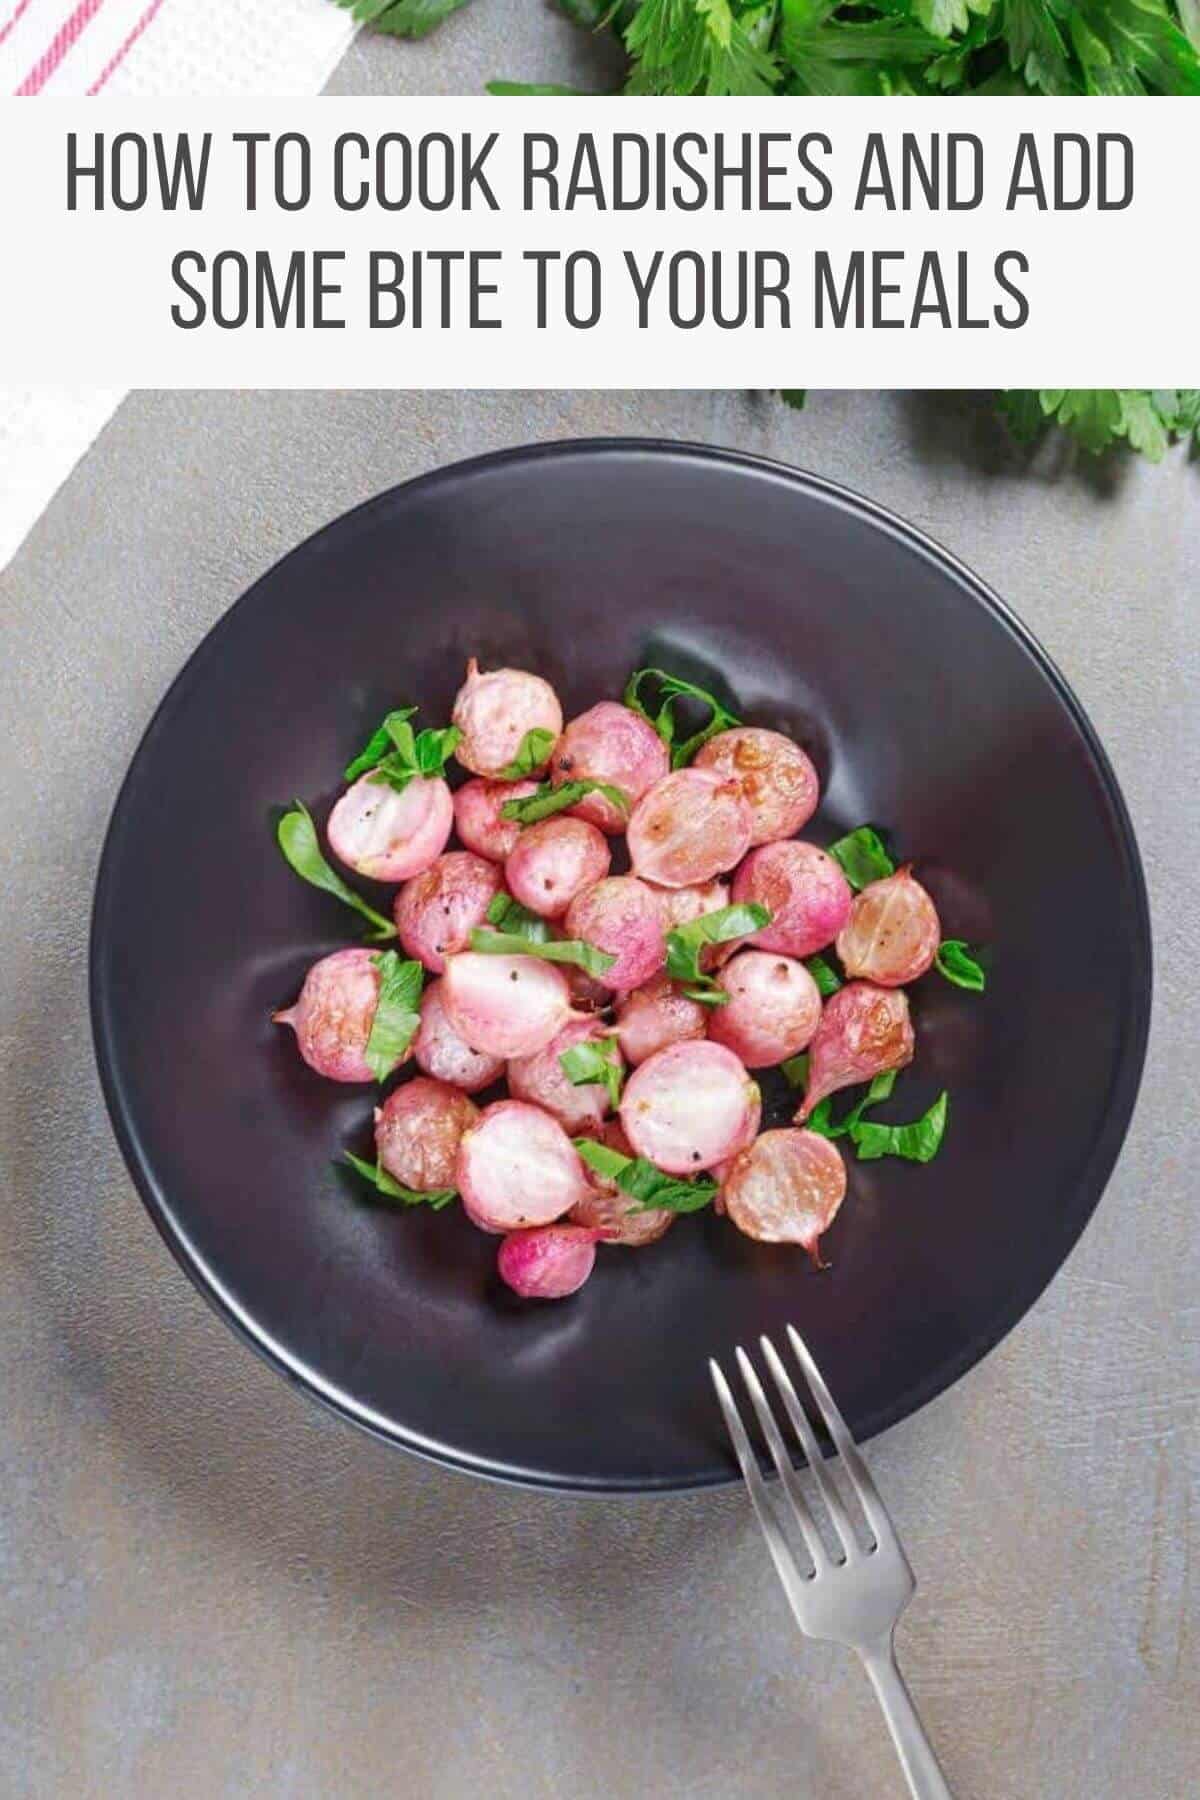 How to cook radishes text overlay.